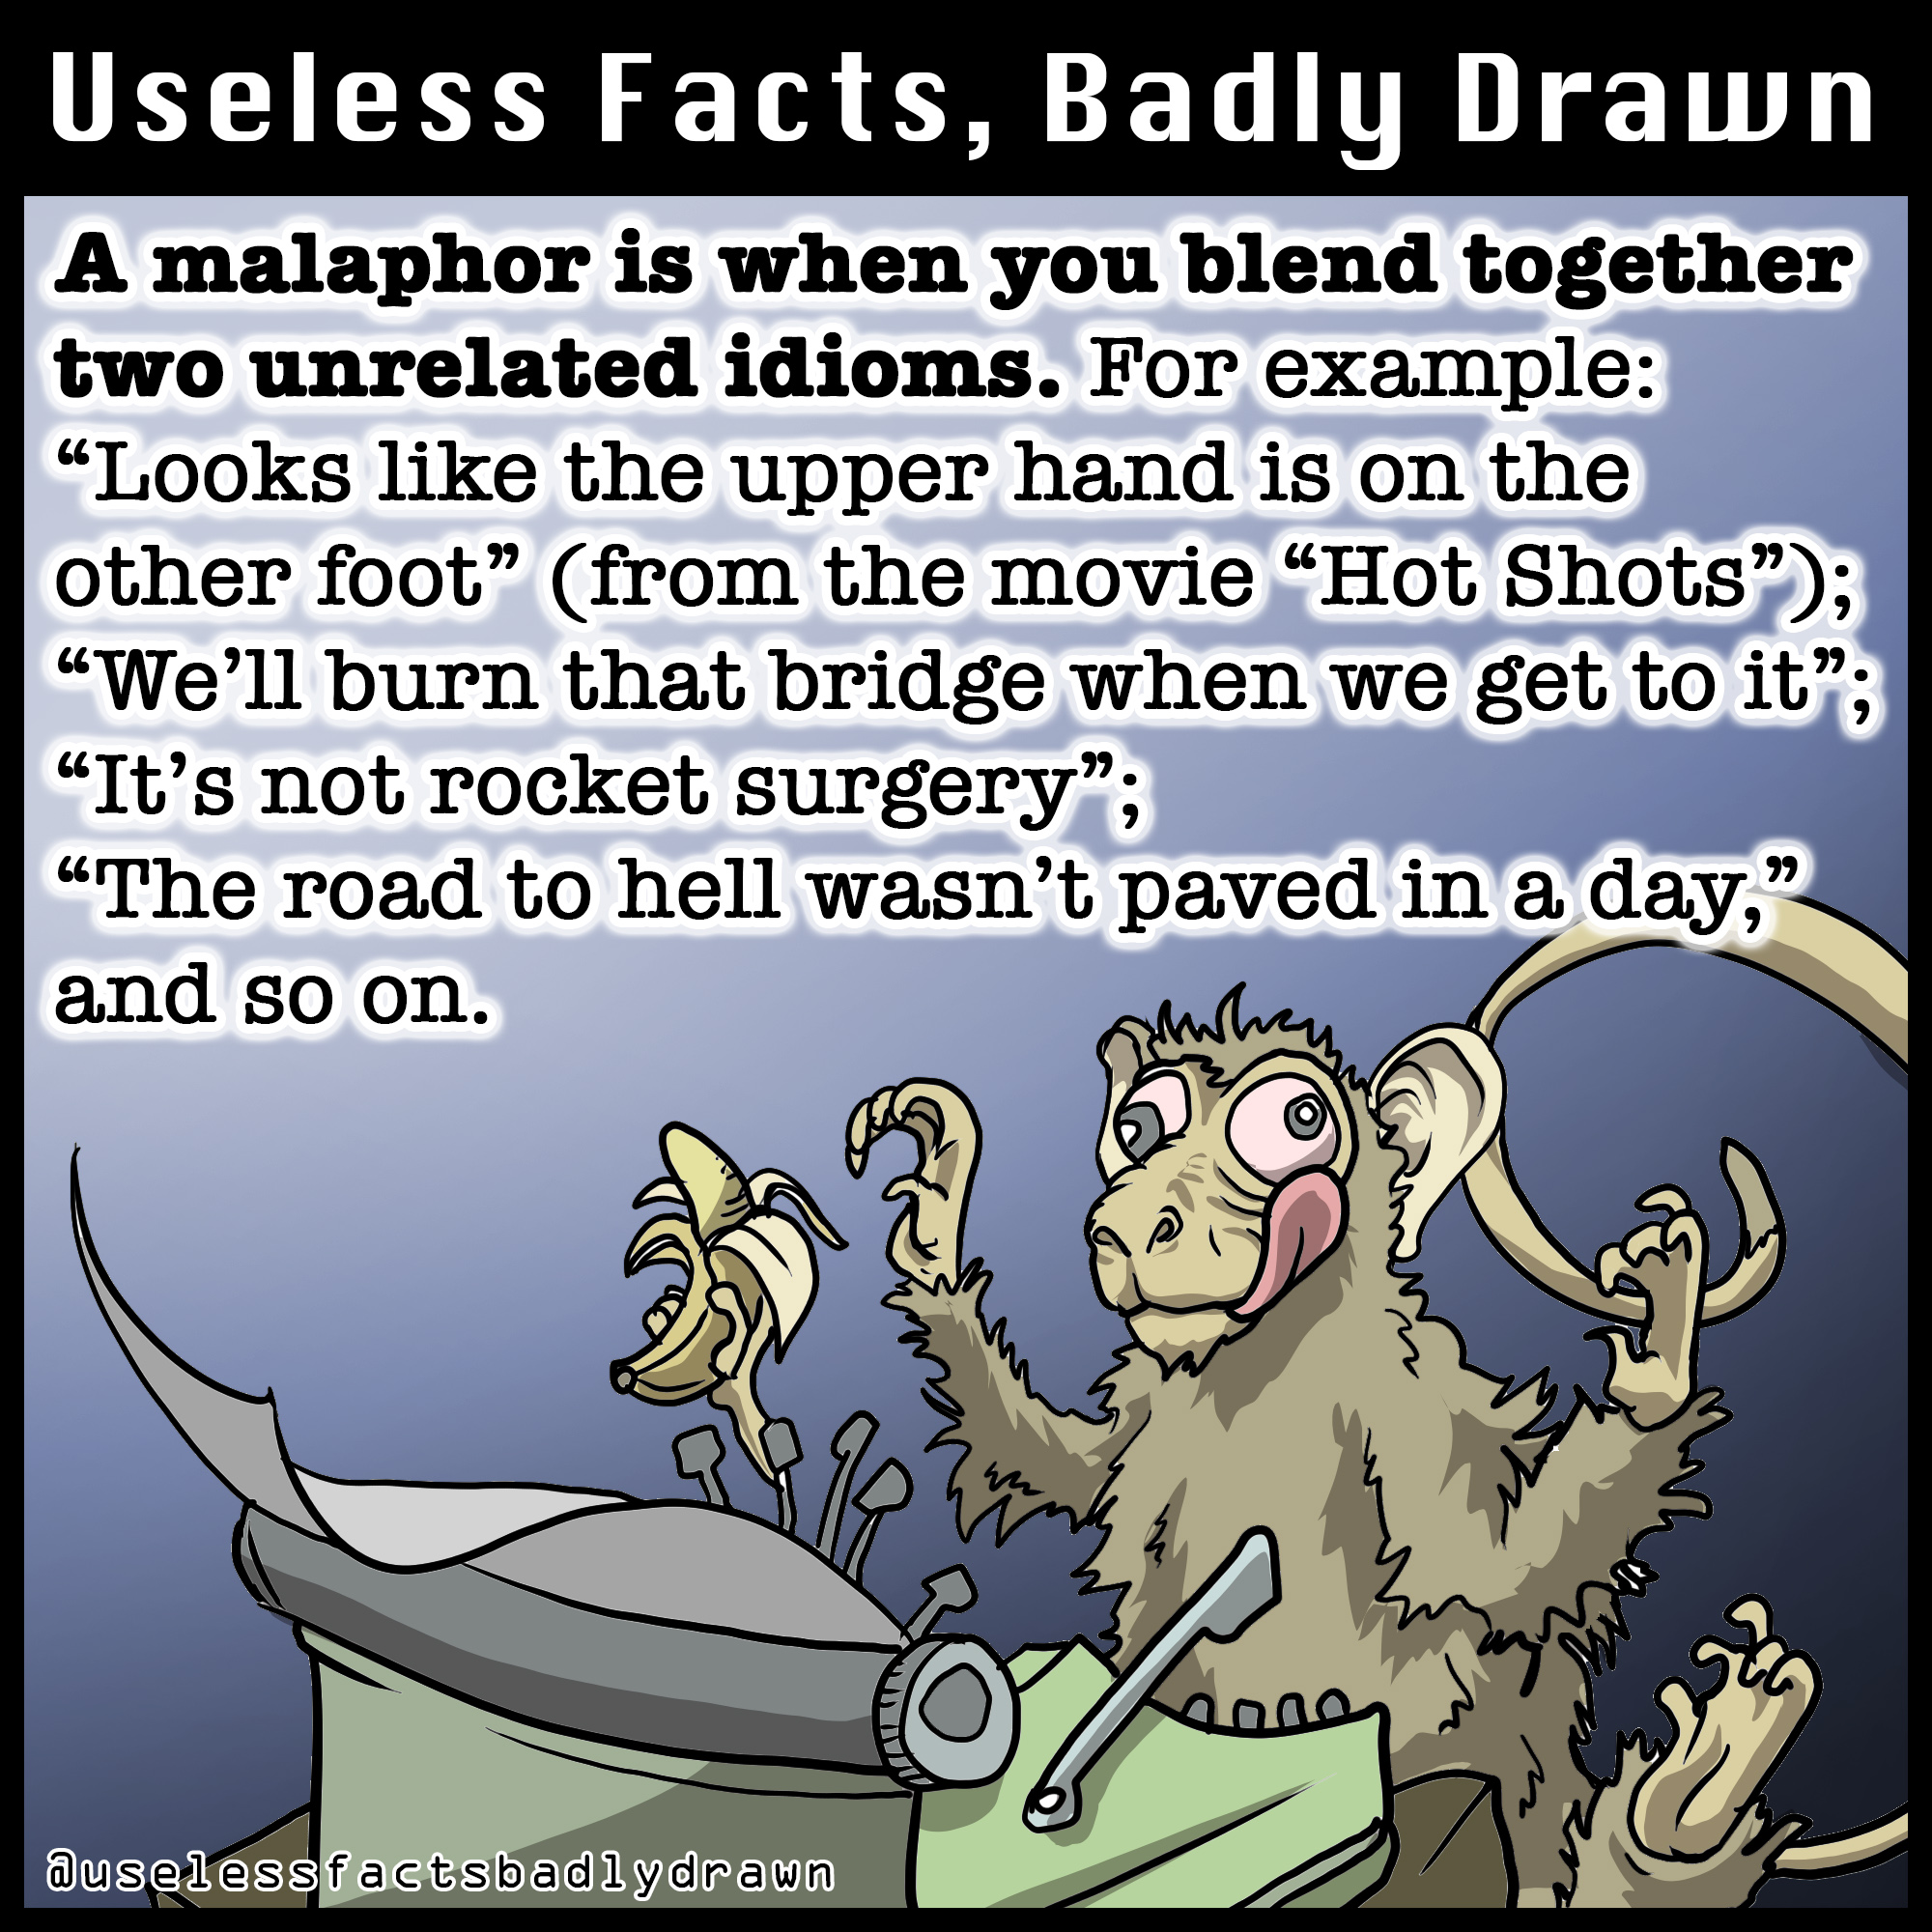 cartoon - Useless Facts, Badly Drawn A malaphor is when you blend together two unrelated idioms. For example Looks the upper hand is on the other foot from the movie "Hot Shots"; We'll burn that bridge when we get to it"; "It's not rocket surgery"; "The r